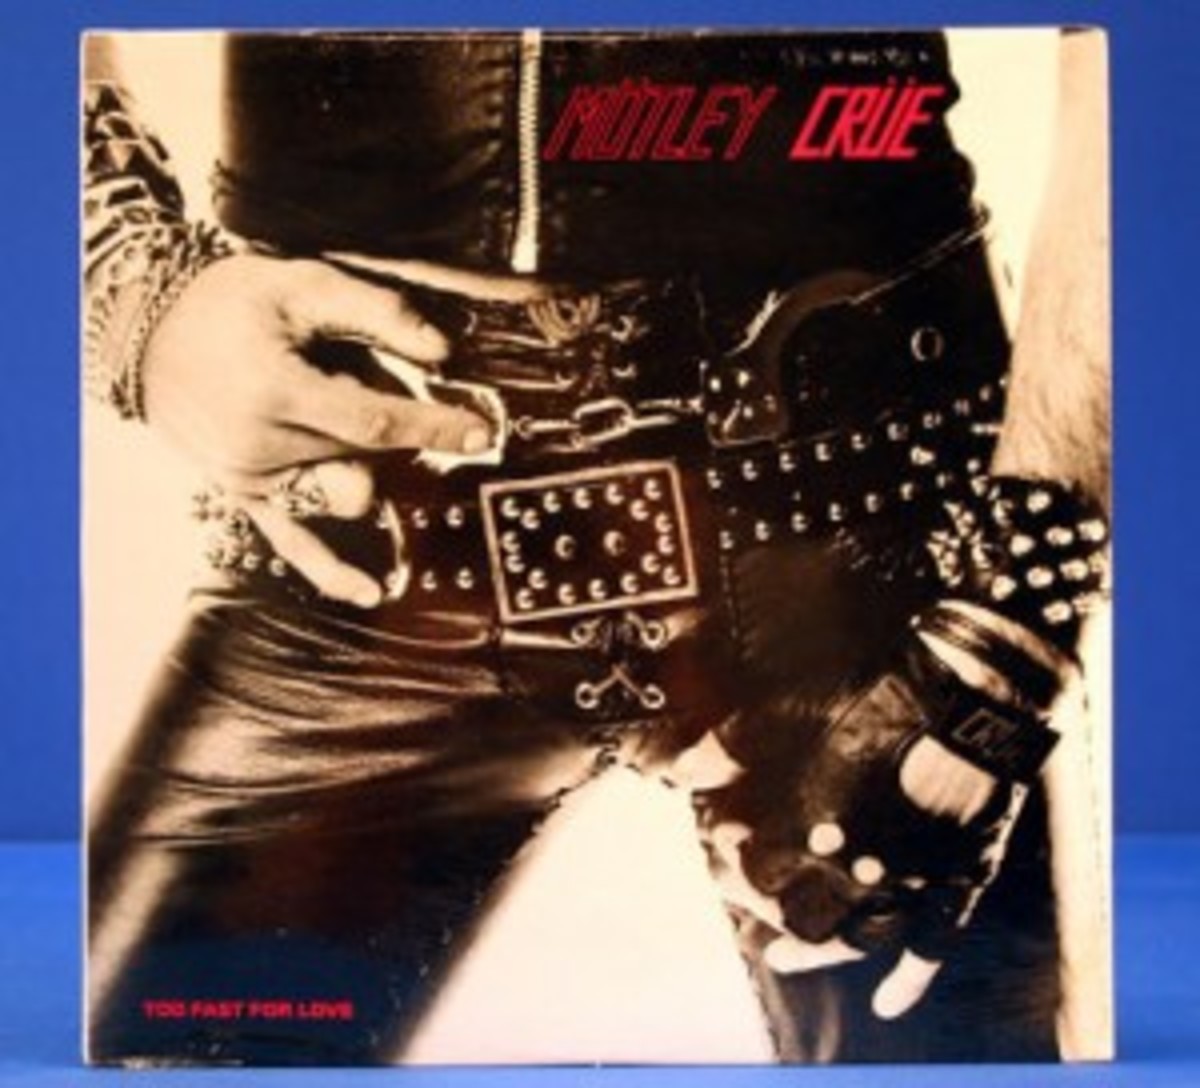 Motley Crue's Too Fast For Love